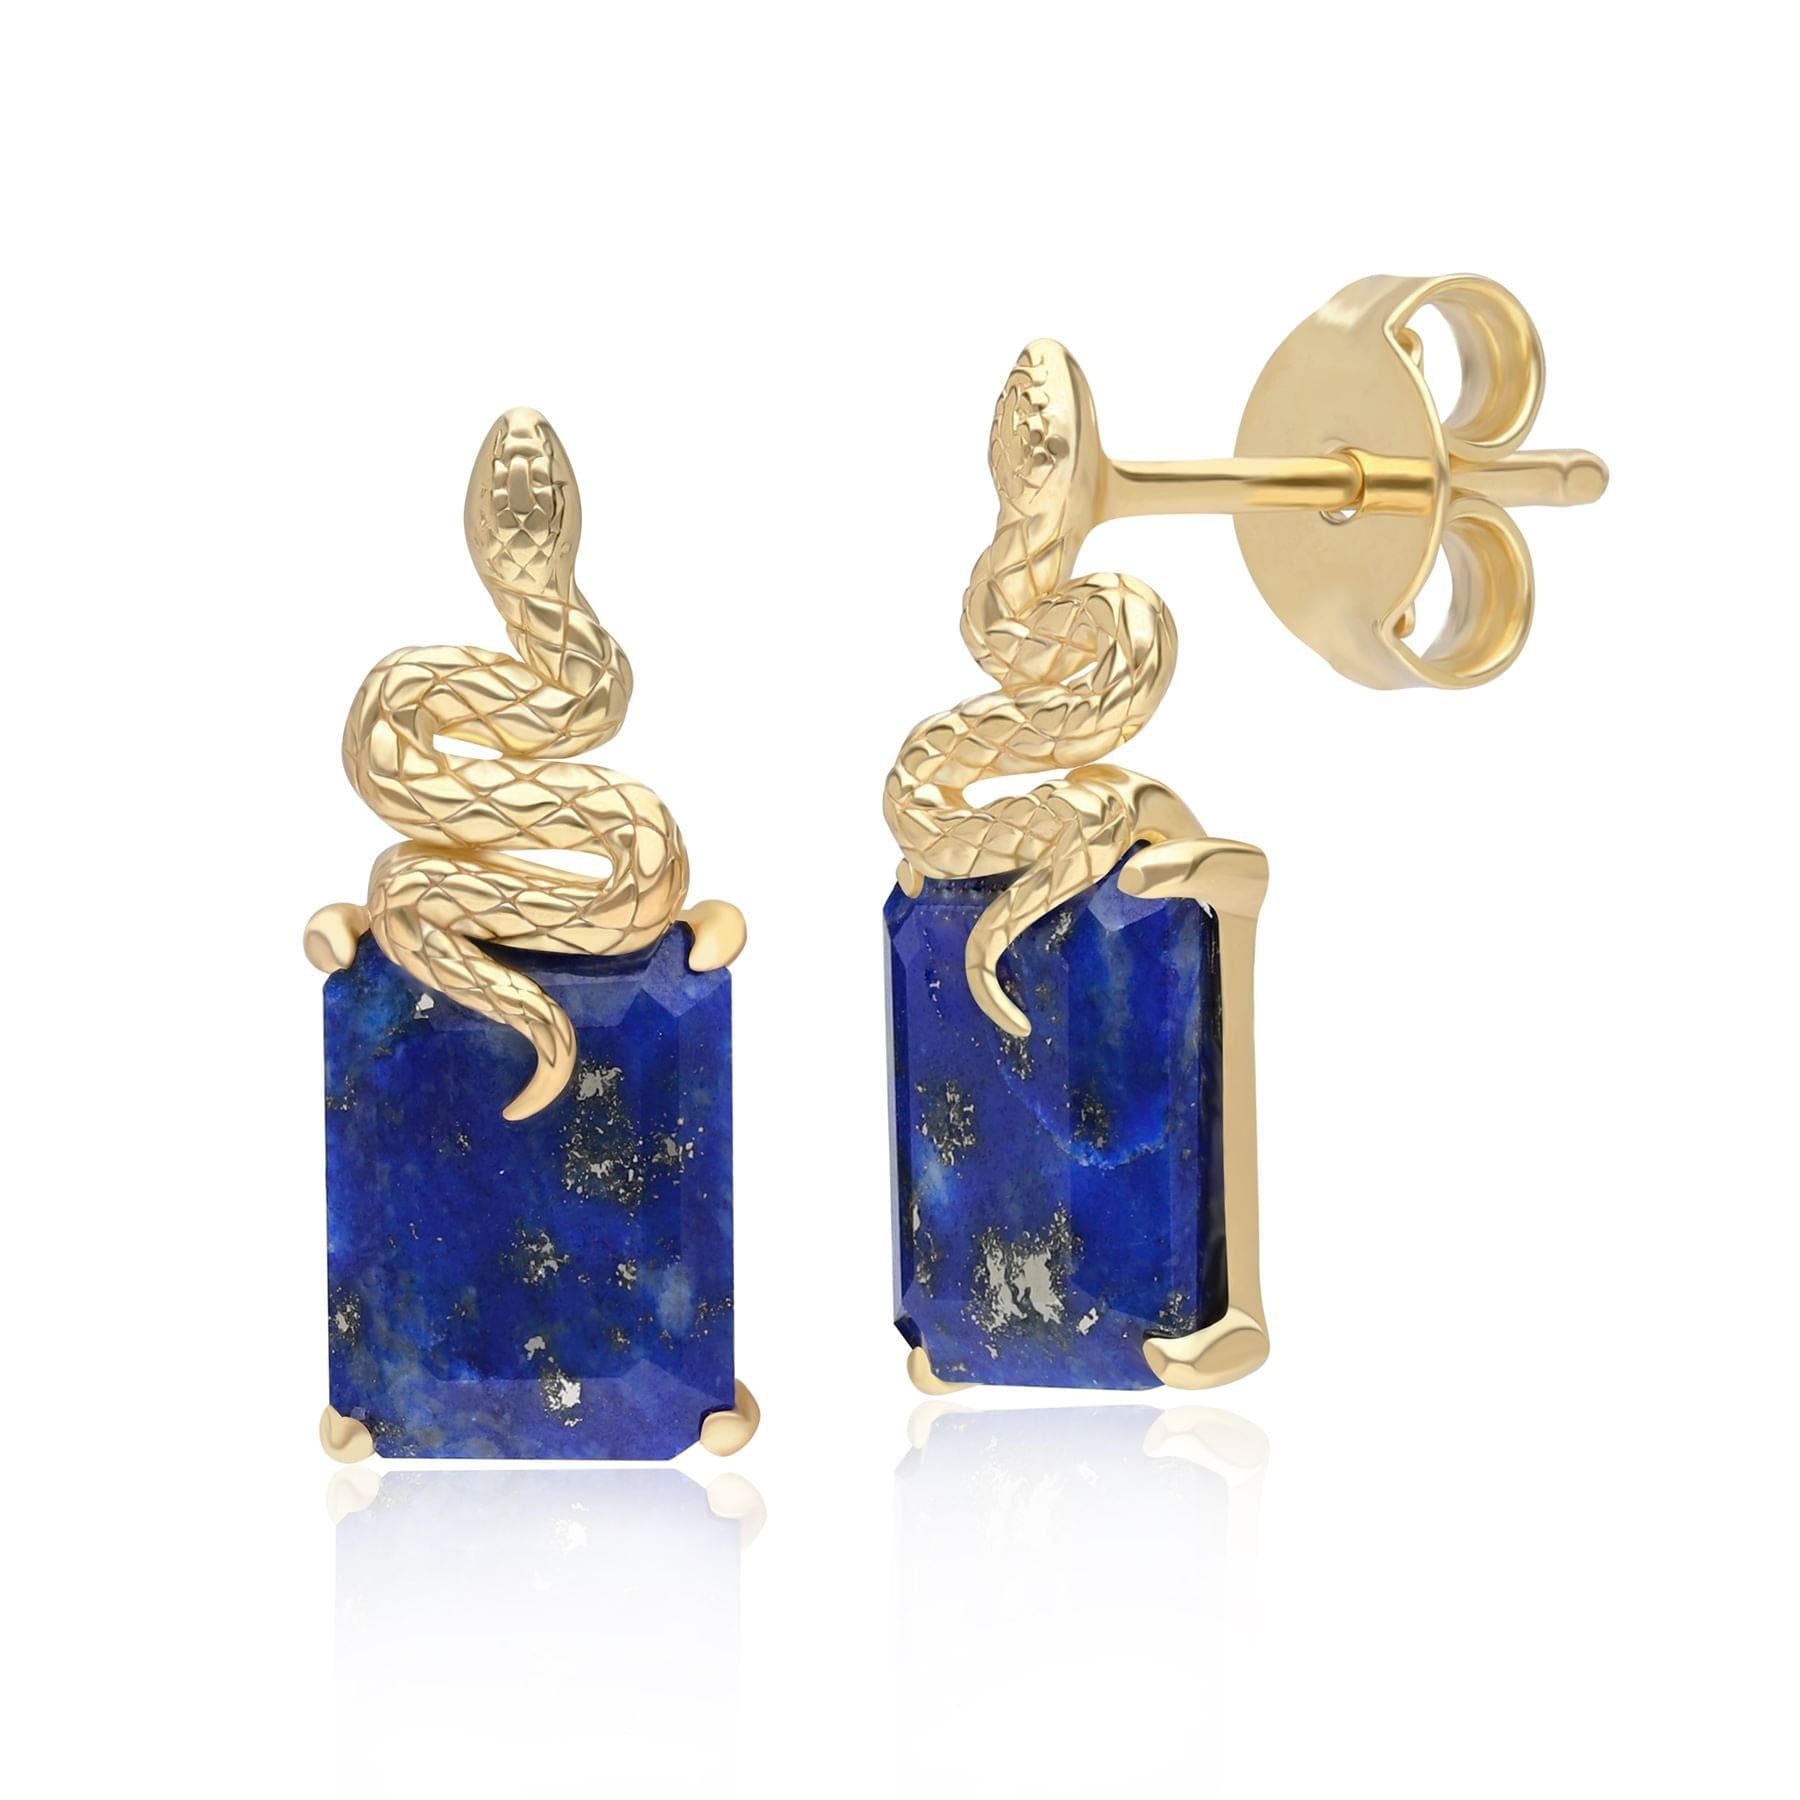 270E037102925 Grand Deco Lapis Lazuli Snake Stud Earrings in Gold Plated Sterling Silver Front